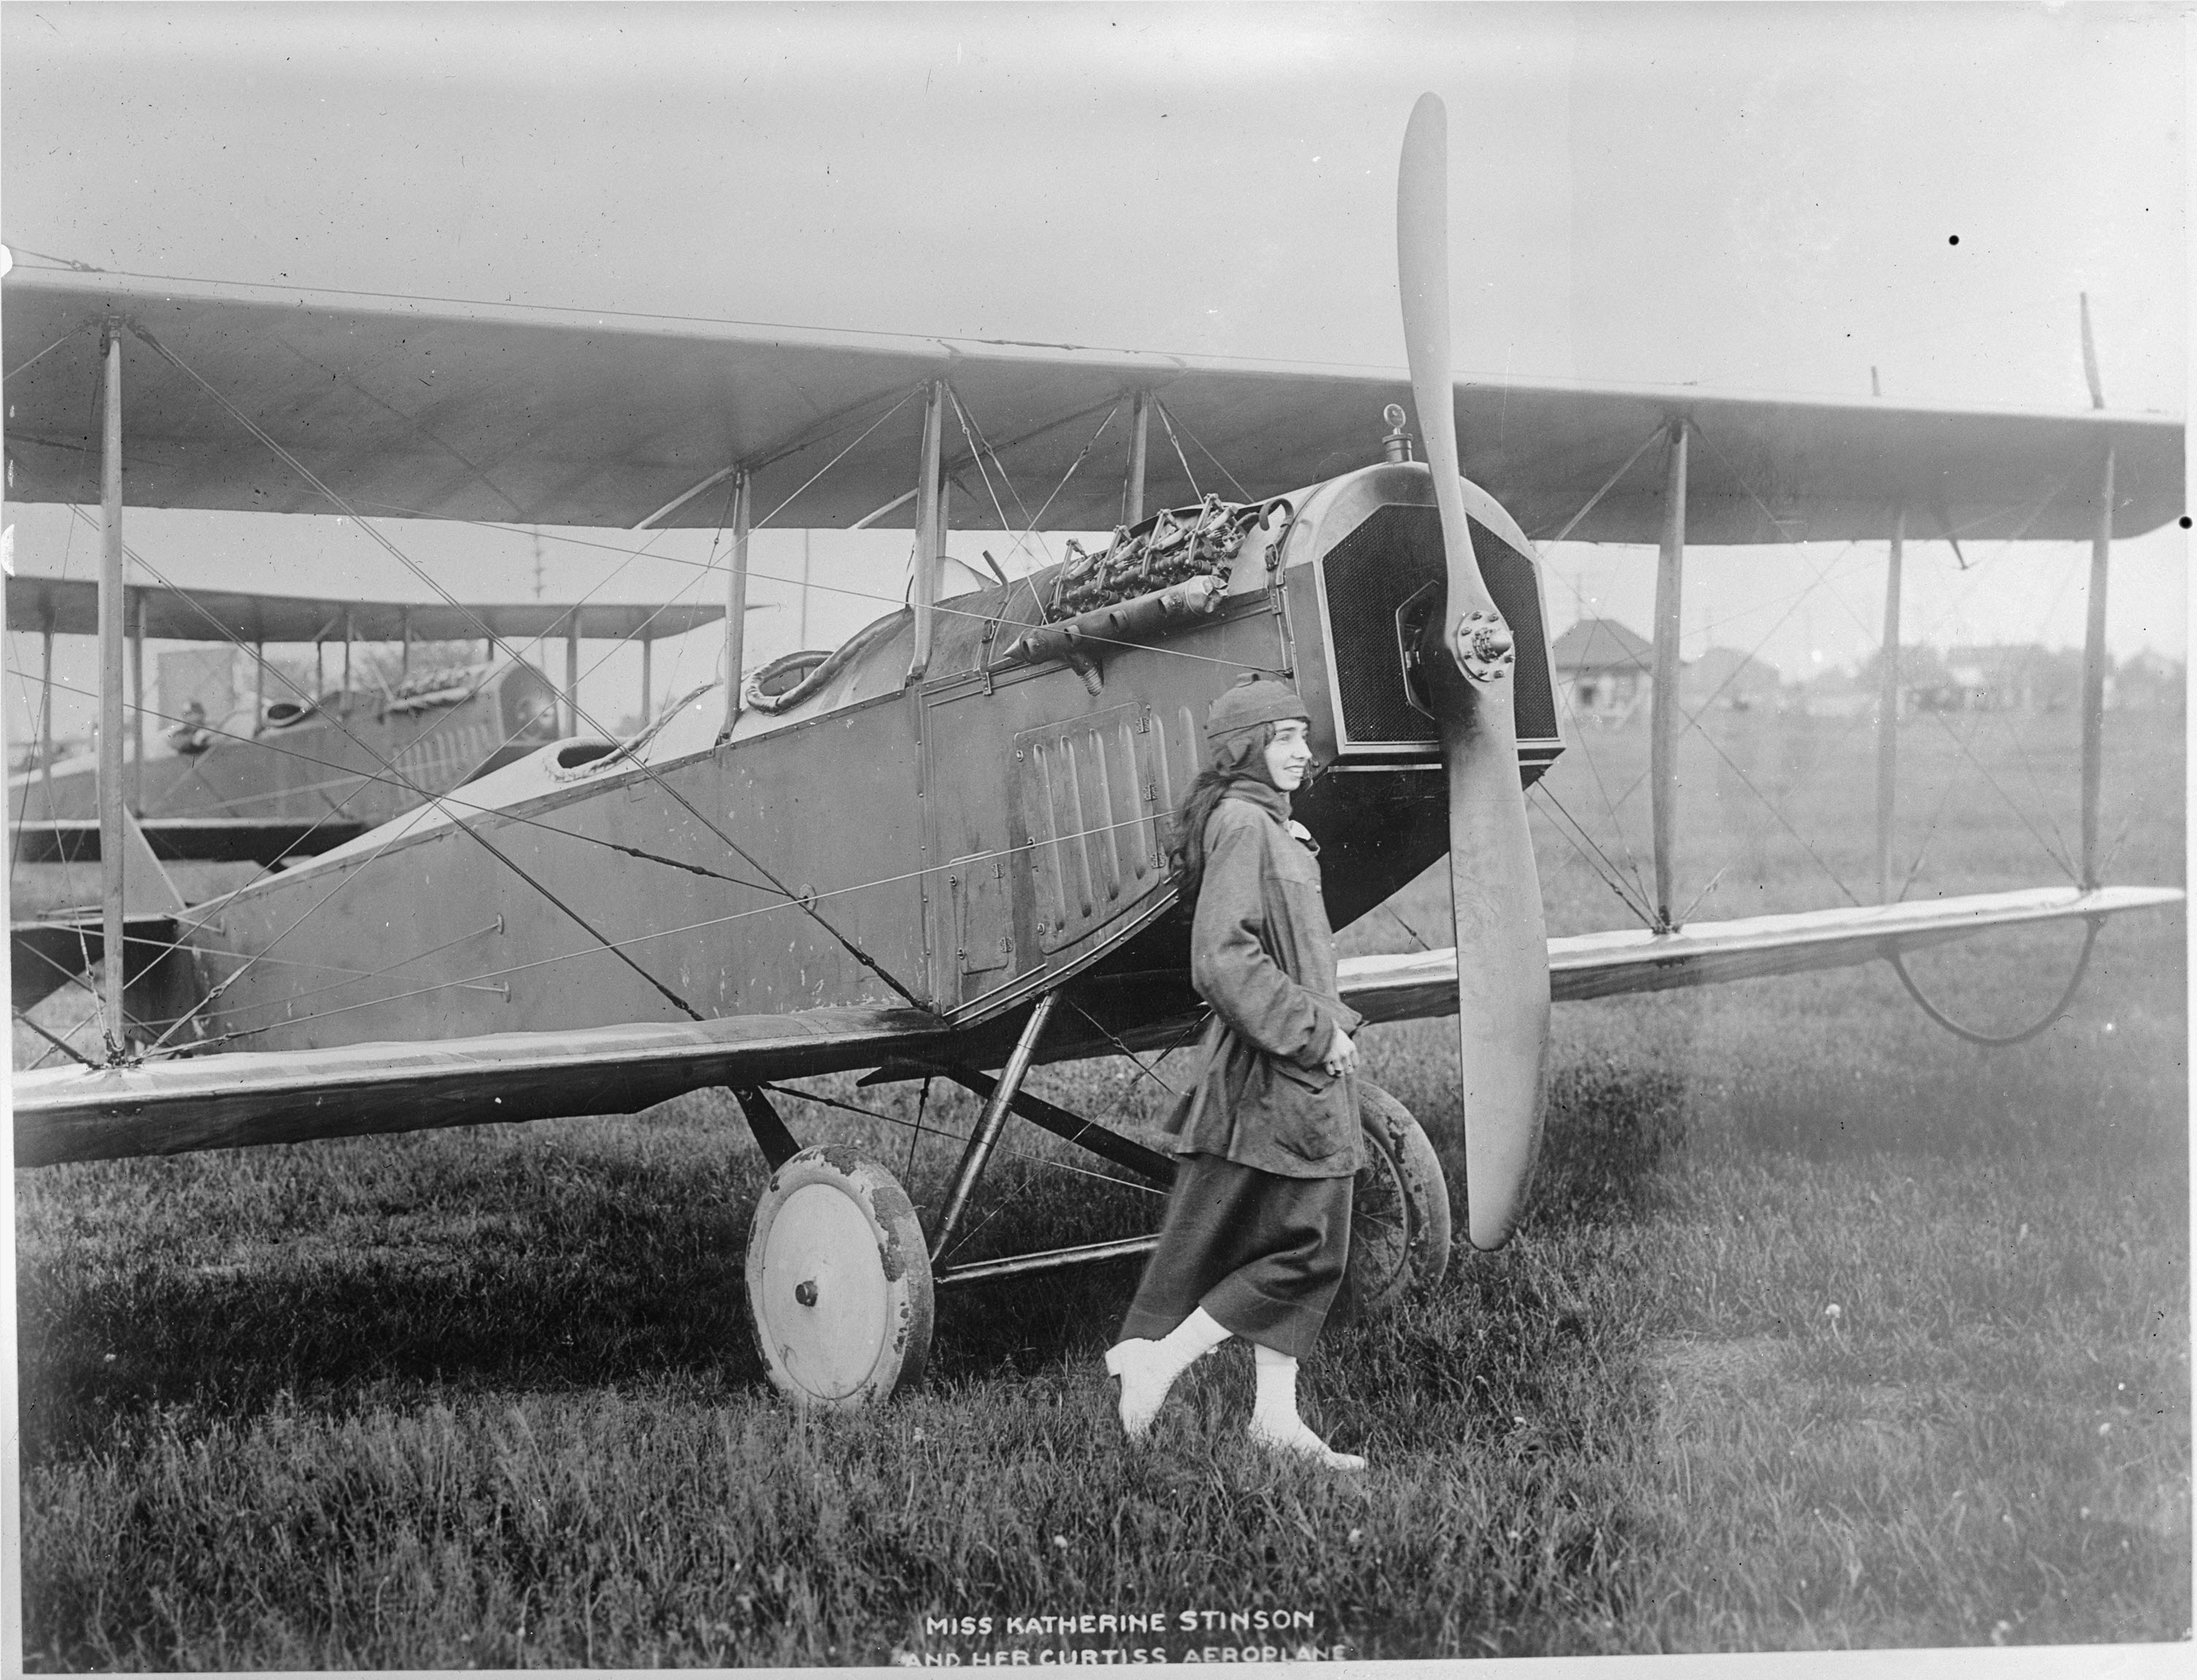 Nineteen year old aviator and volunteer Red Cross carrier, Katherine Stinson preparing for flight from Buffalo to Washington D.C., 1918.jpg